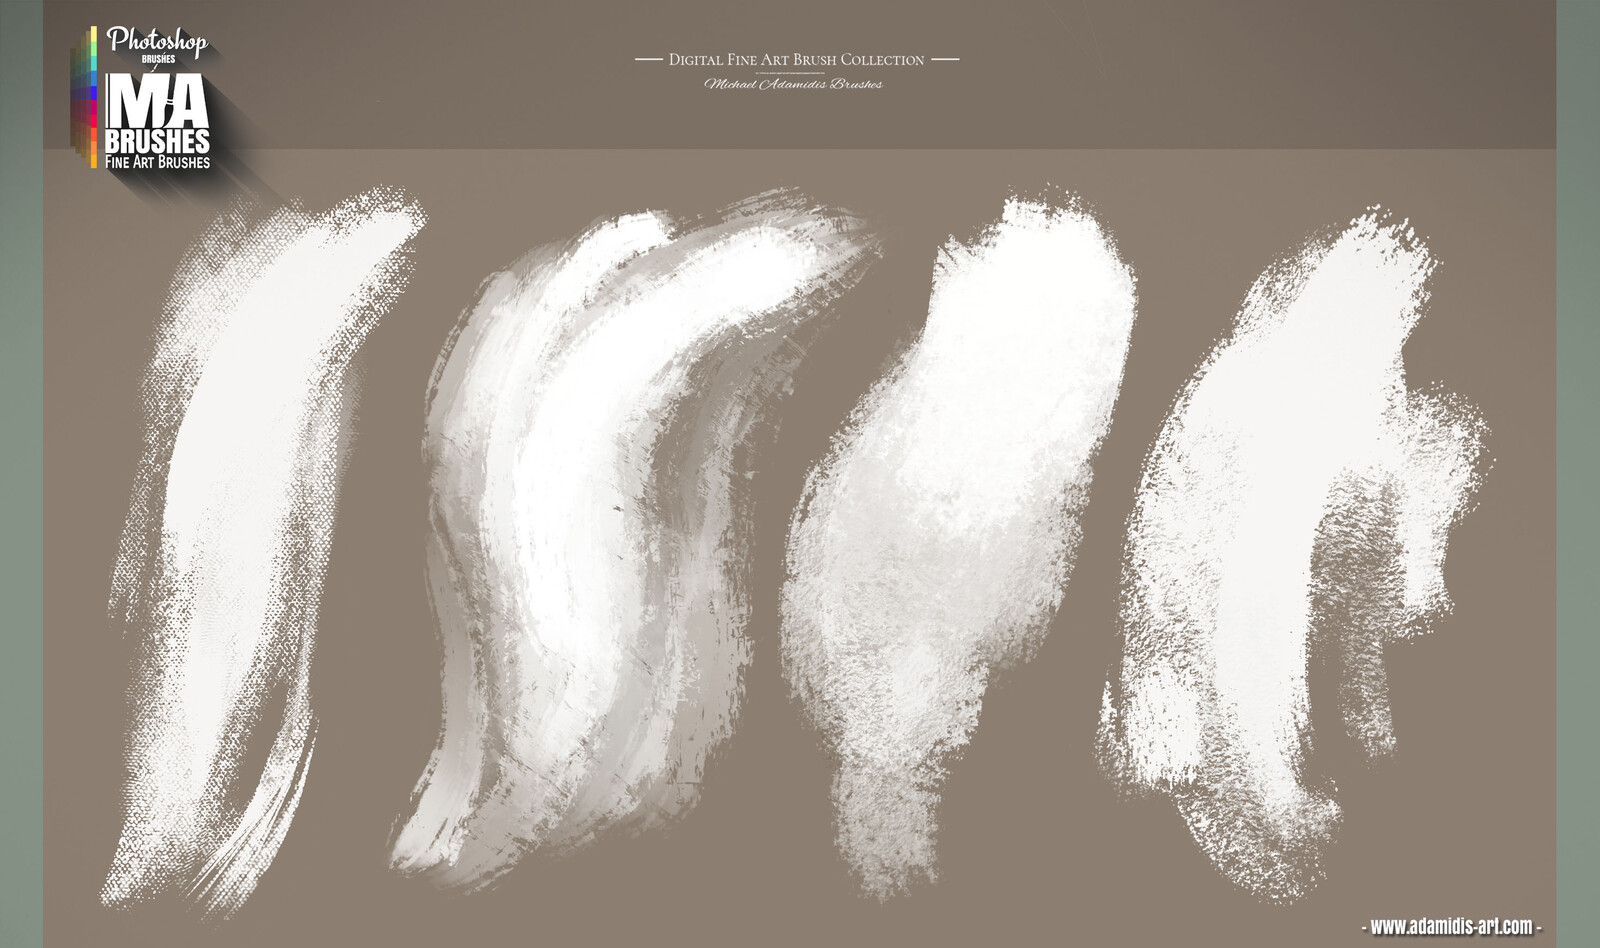 Artistic Photoshop Concept Art Brushes for digital Painting - MA-BRUSHES